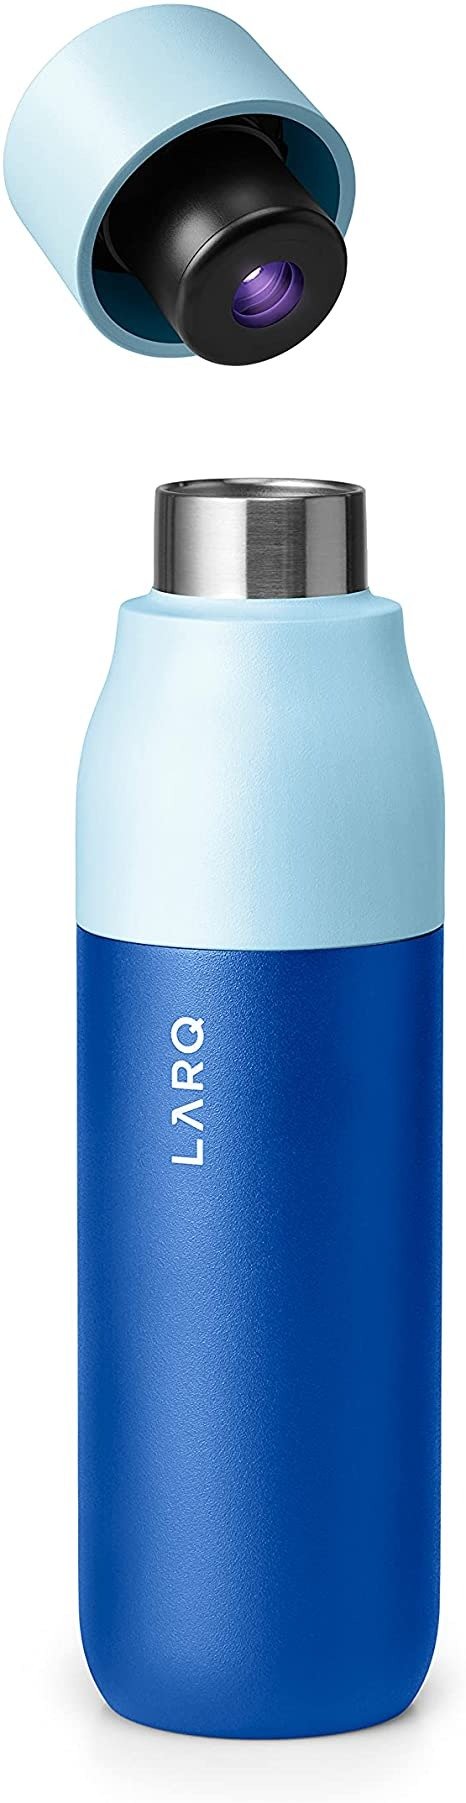 Bottle DG23 Edition - Self-Cleaning and Insulated Stainless Steel Water Bottle with Award-winning Design and UV Water Sanitizer, 17oz